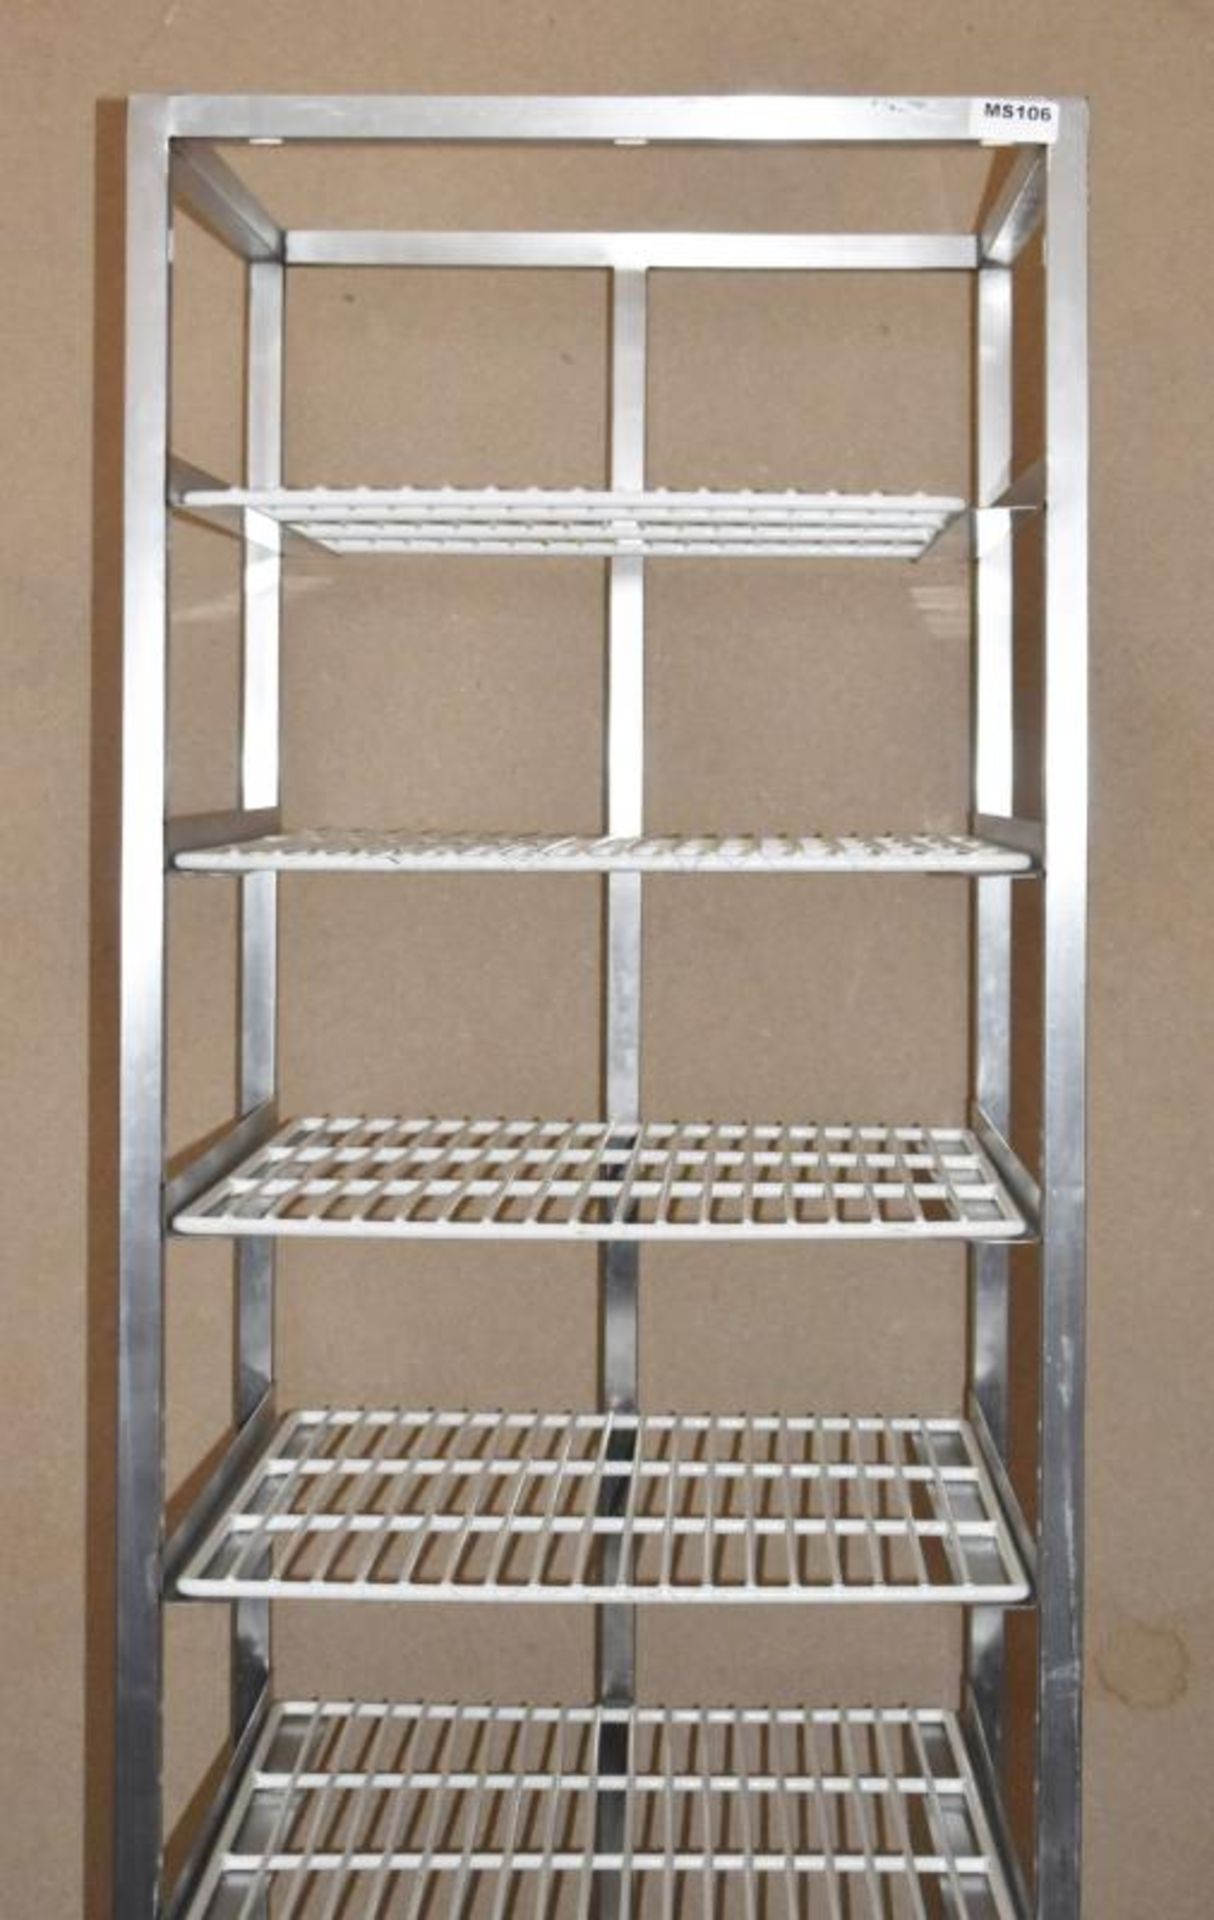 1 x Stainless Steel 8 Tier Mobile Shelf Unit For Commercial Kitchens With White Coated Wire Shelves - Image 3 of 11